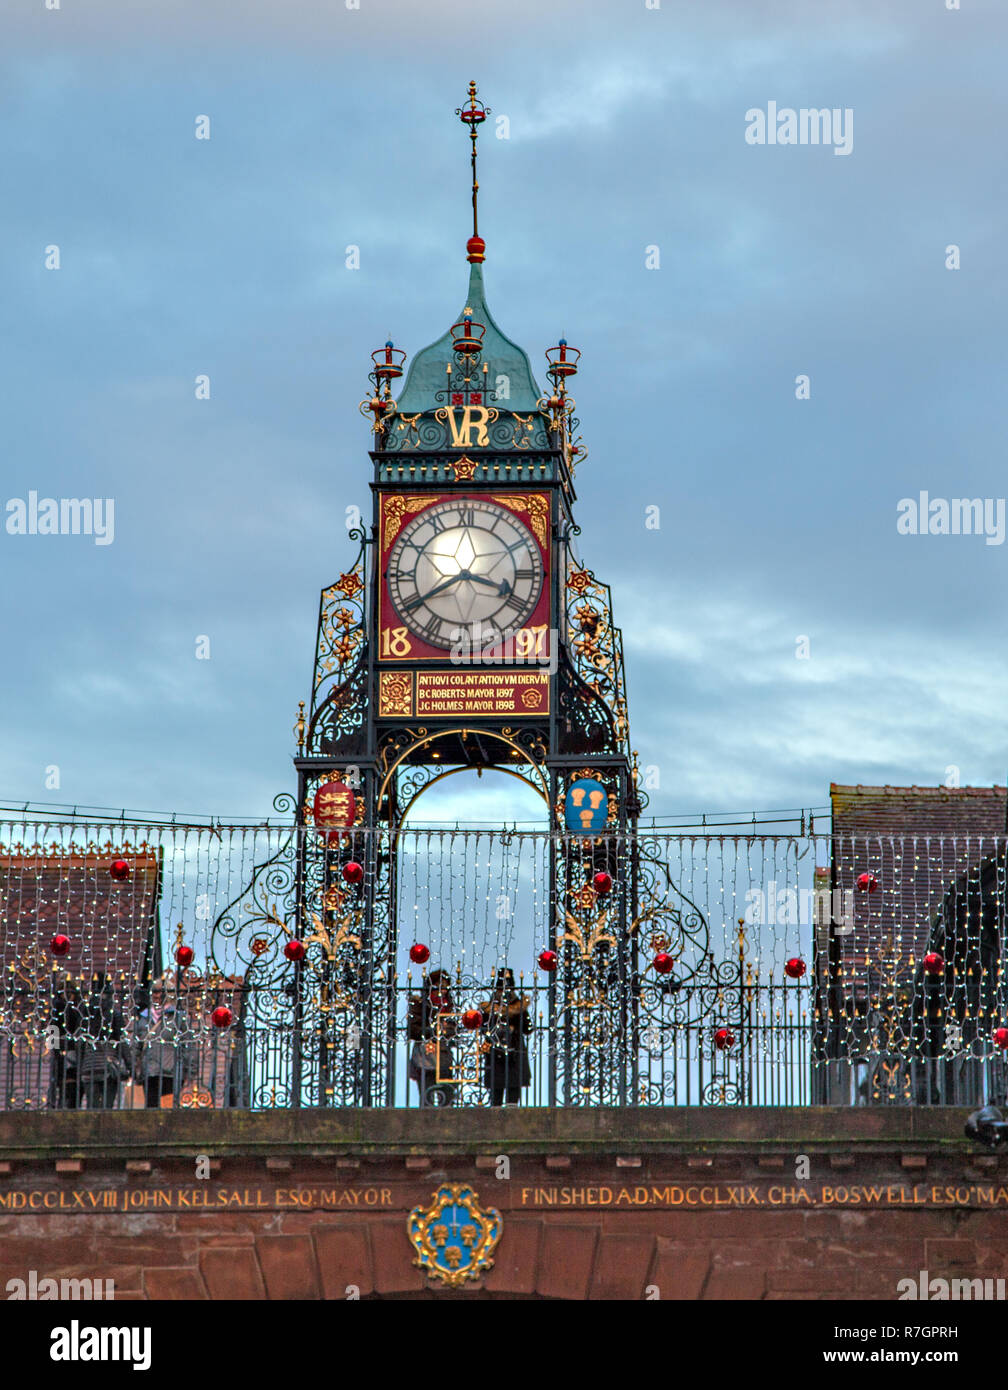 Eastgate Clock and  tower standing on the cities Roman  walls erected  in 1897 in the Cheshire city of Chester England now a grade 1 listed building Stock Photo